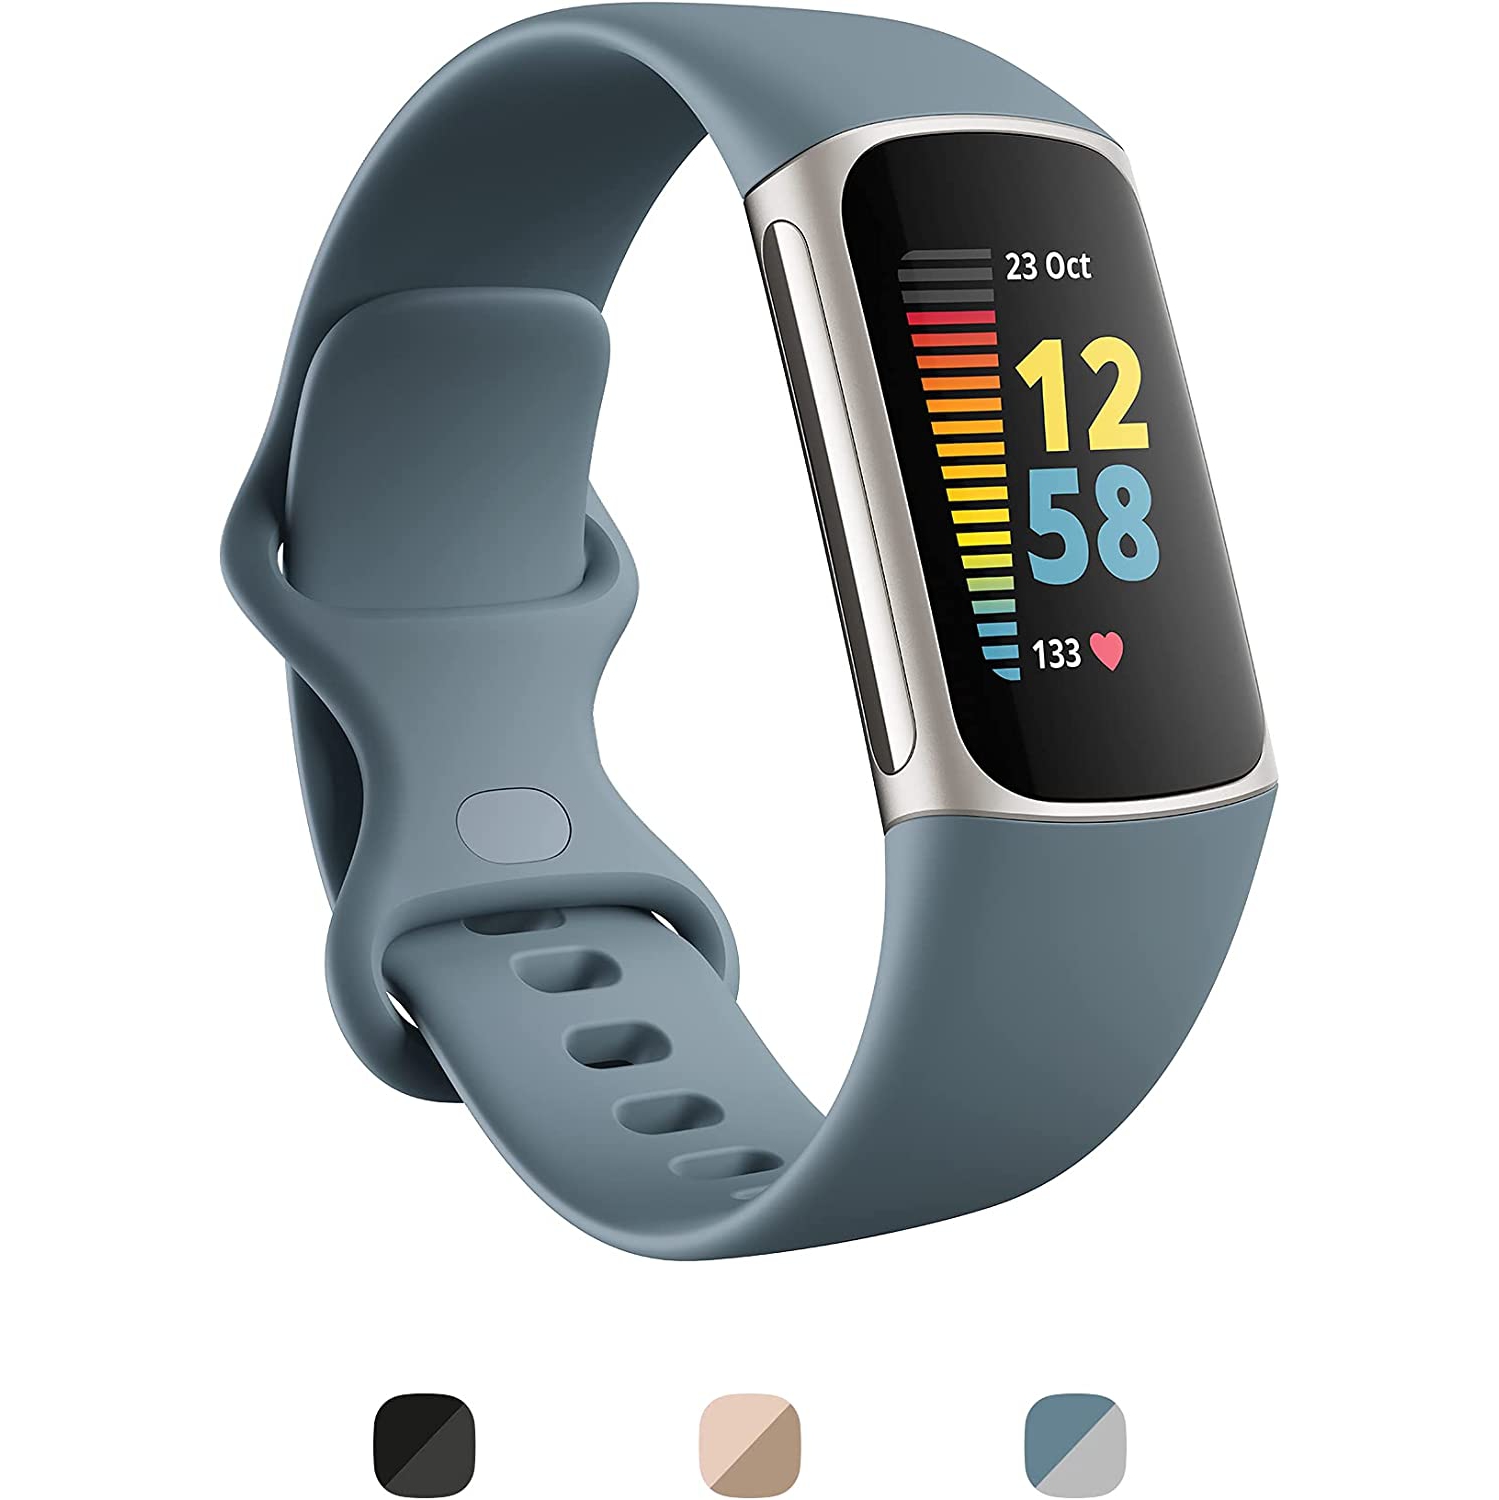 Charge 5 Advanced Fitness & Health Tracker with Built-in GPS, Stress Management Tools